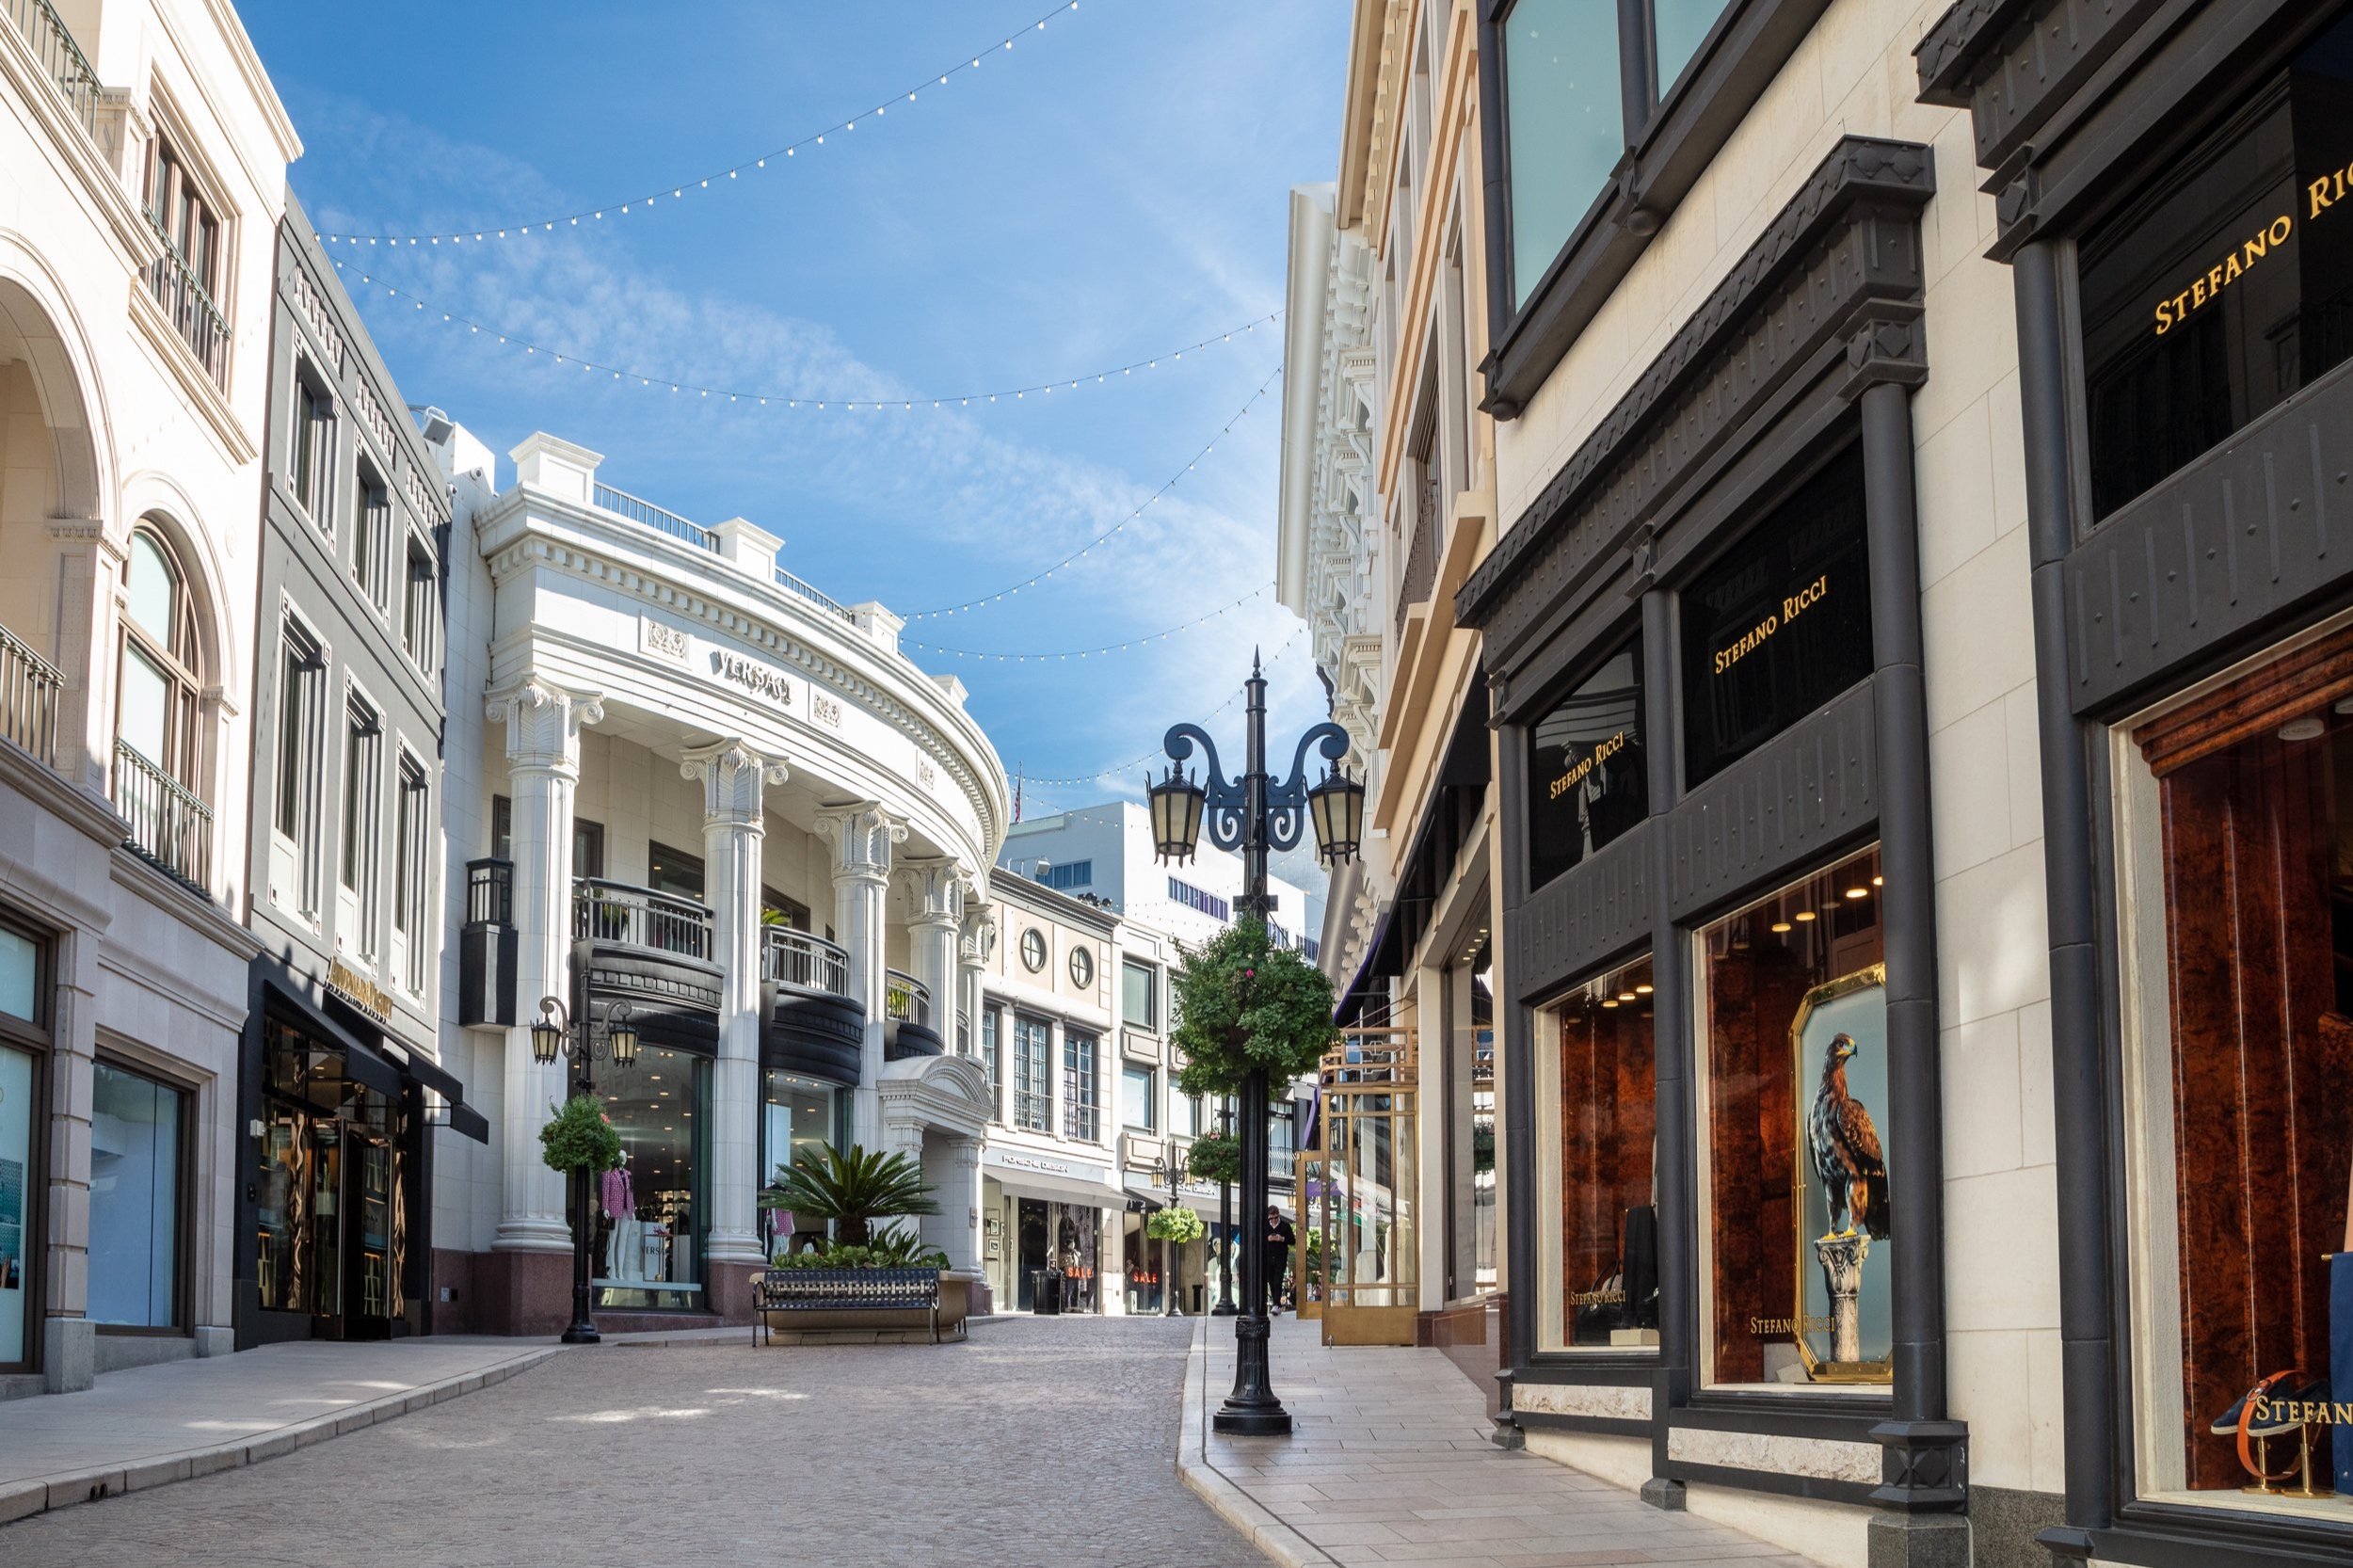 Rodeo Drive - Beverly Hills, CA